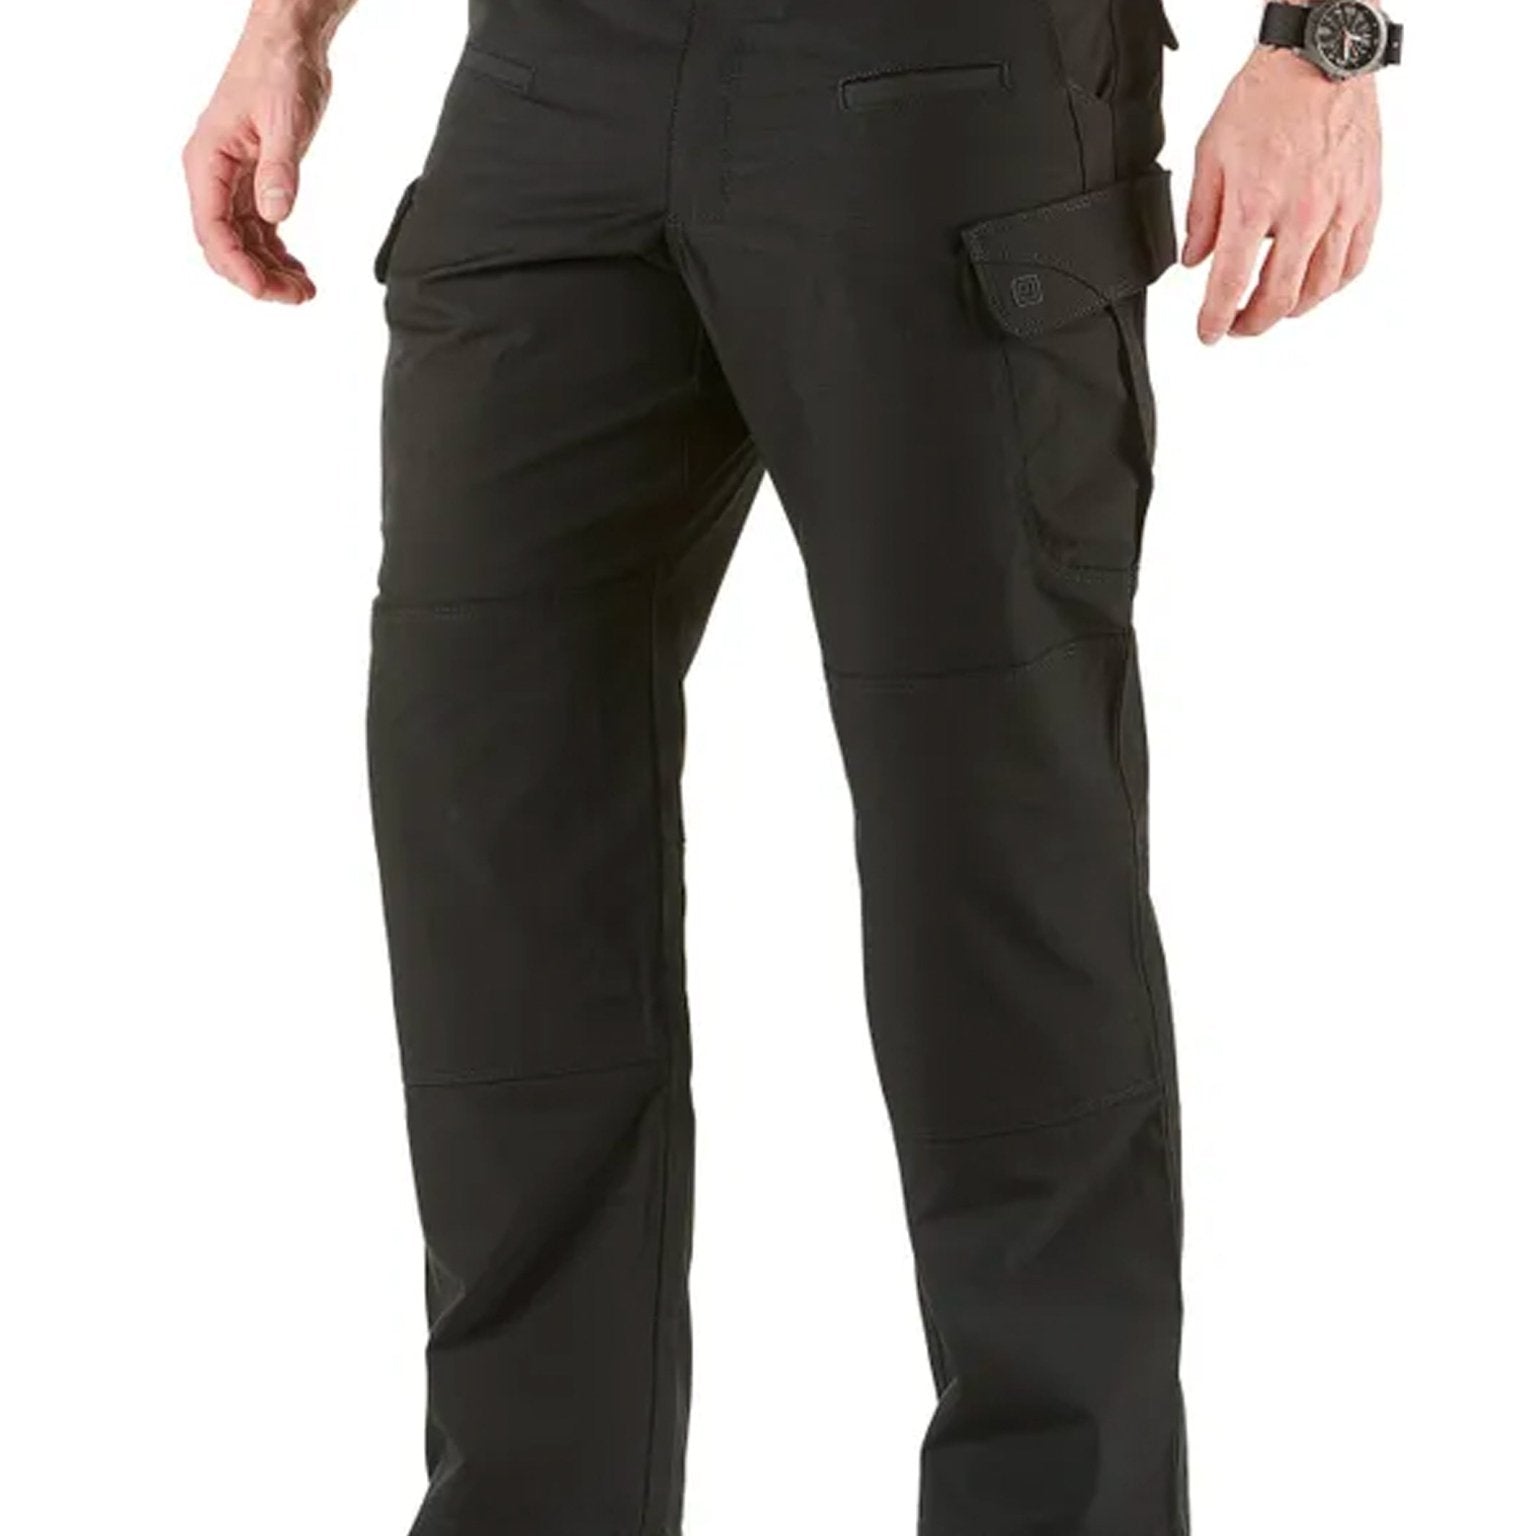 4elementsclothing5.11 Tactical5.11 Tactical - 5.11 STRYKE® PANT - Mens Stryke trouser Ripstop, Teflon finished, knee pocket - Style 74369Trousers & Jeans74369-019-30Wx30L